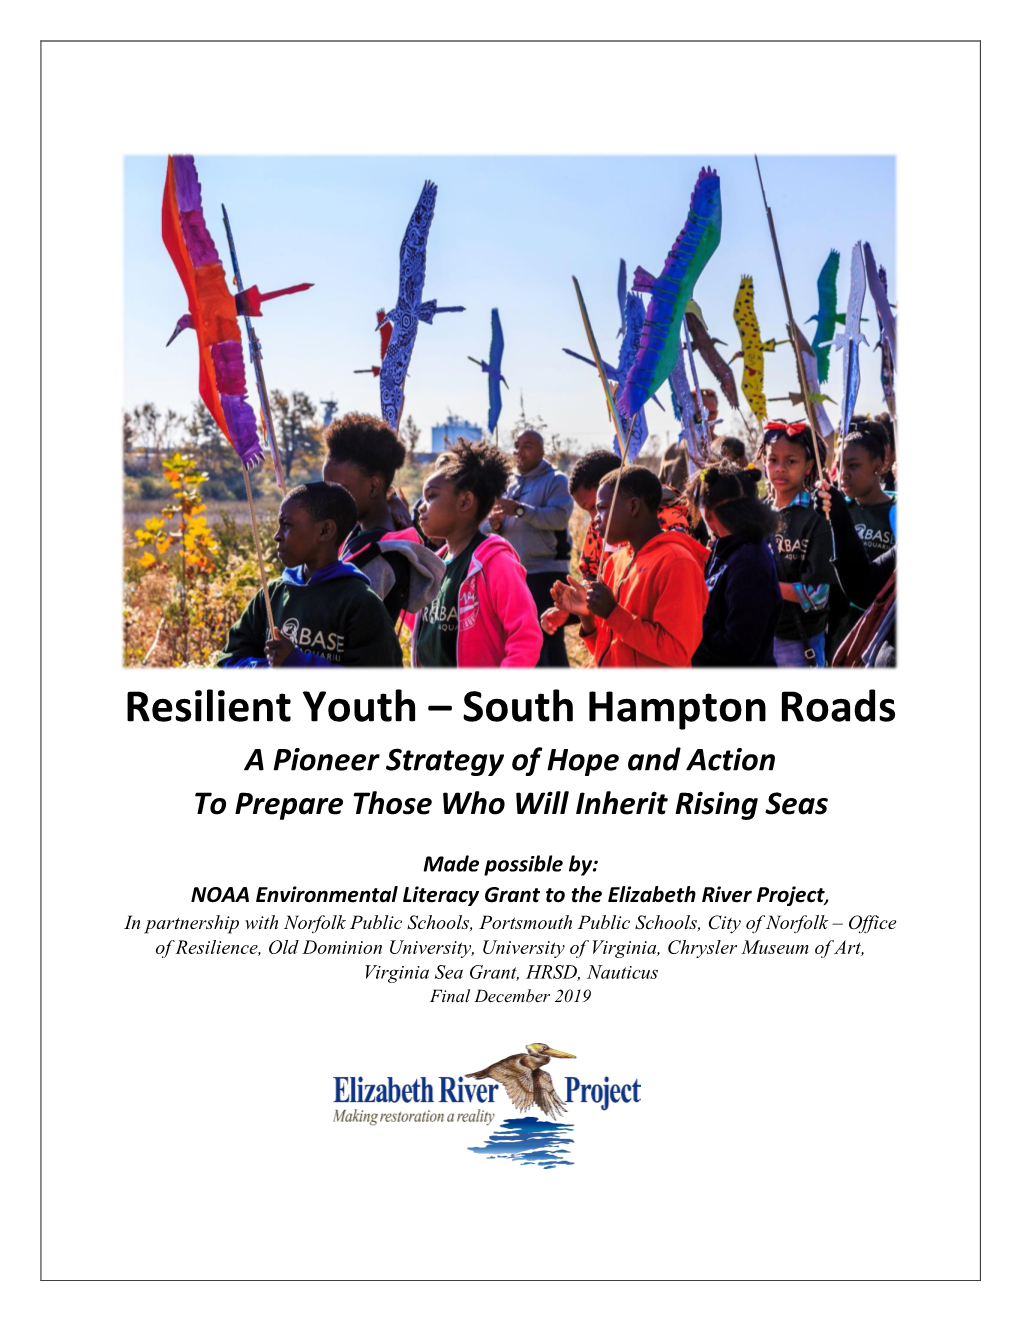 Resilient Youth – South Hampton Roads a Pioneer Strategy of Hope and Action to Prepare Those Who Will Inherit Rising Seas